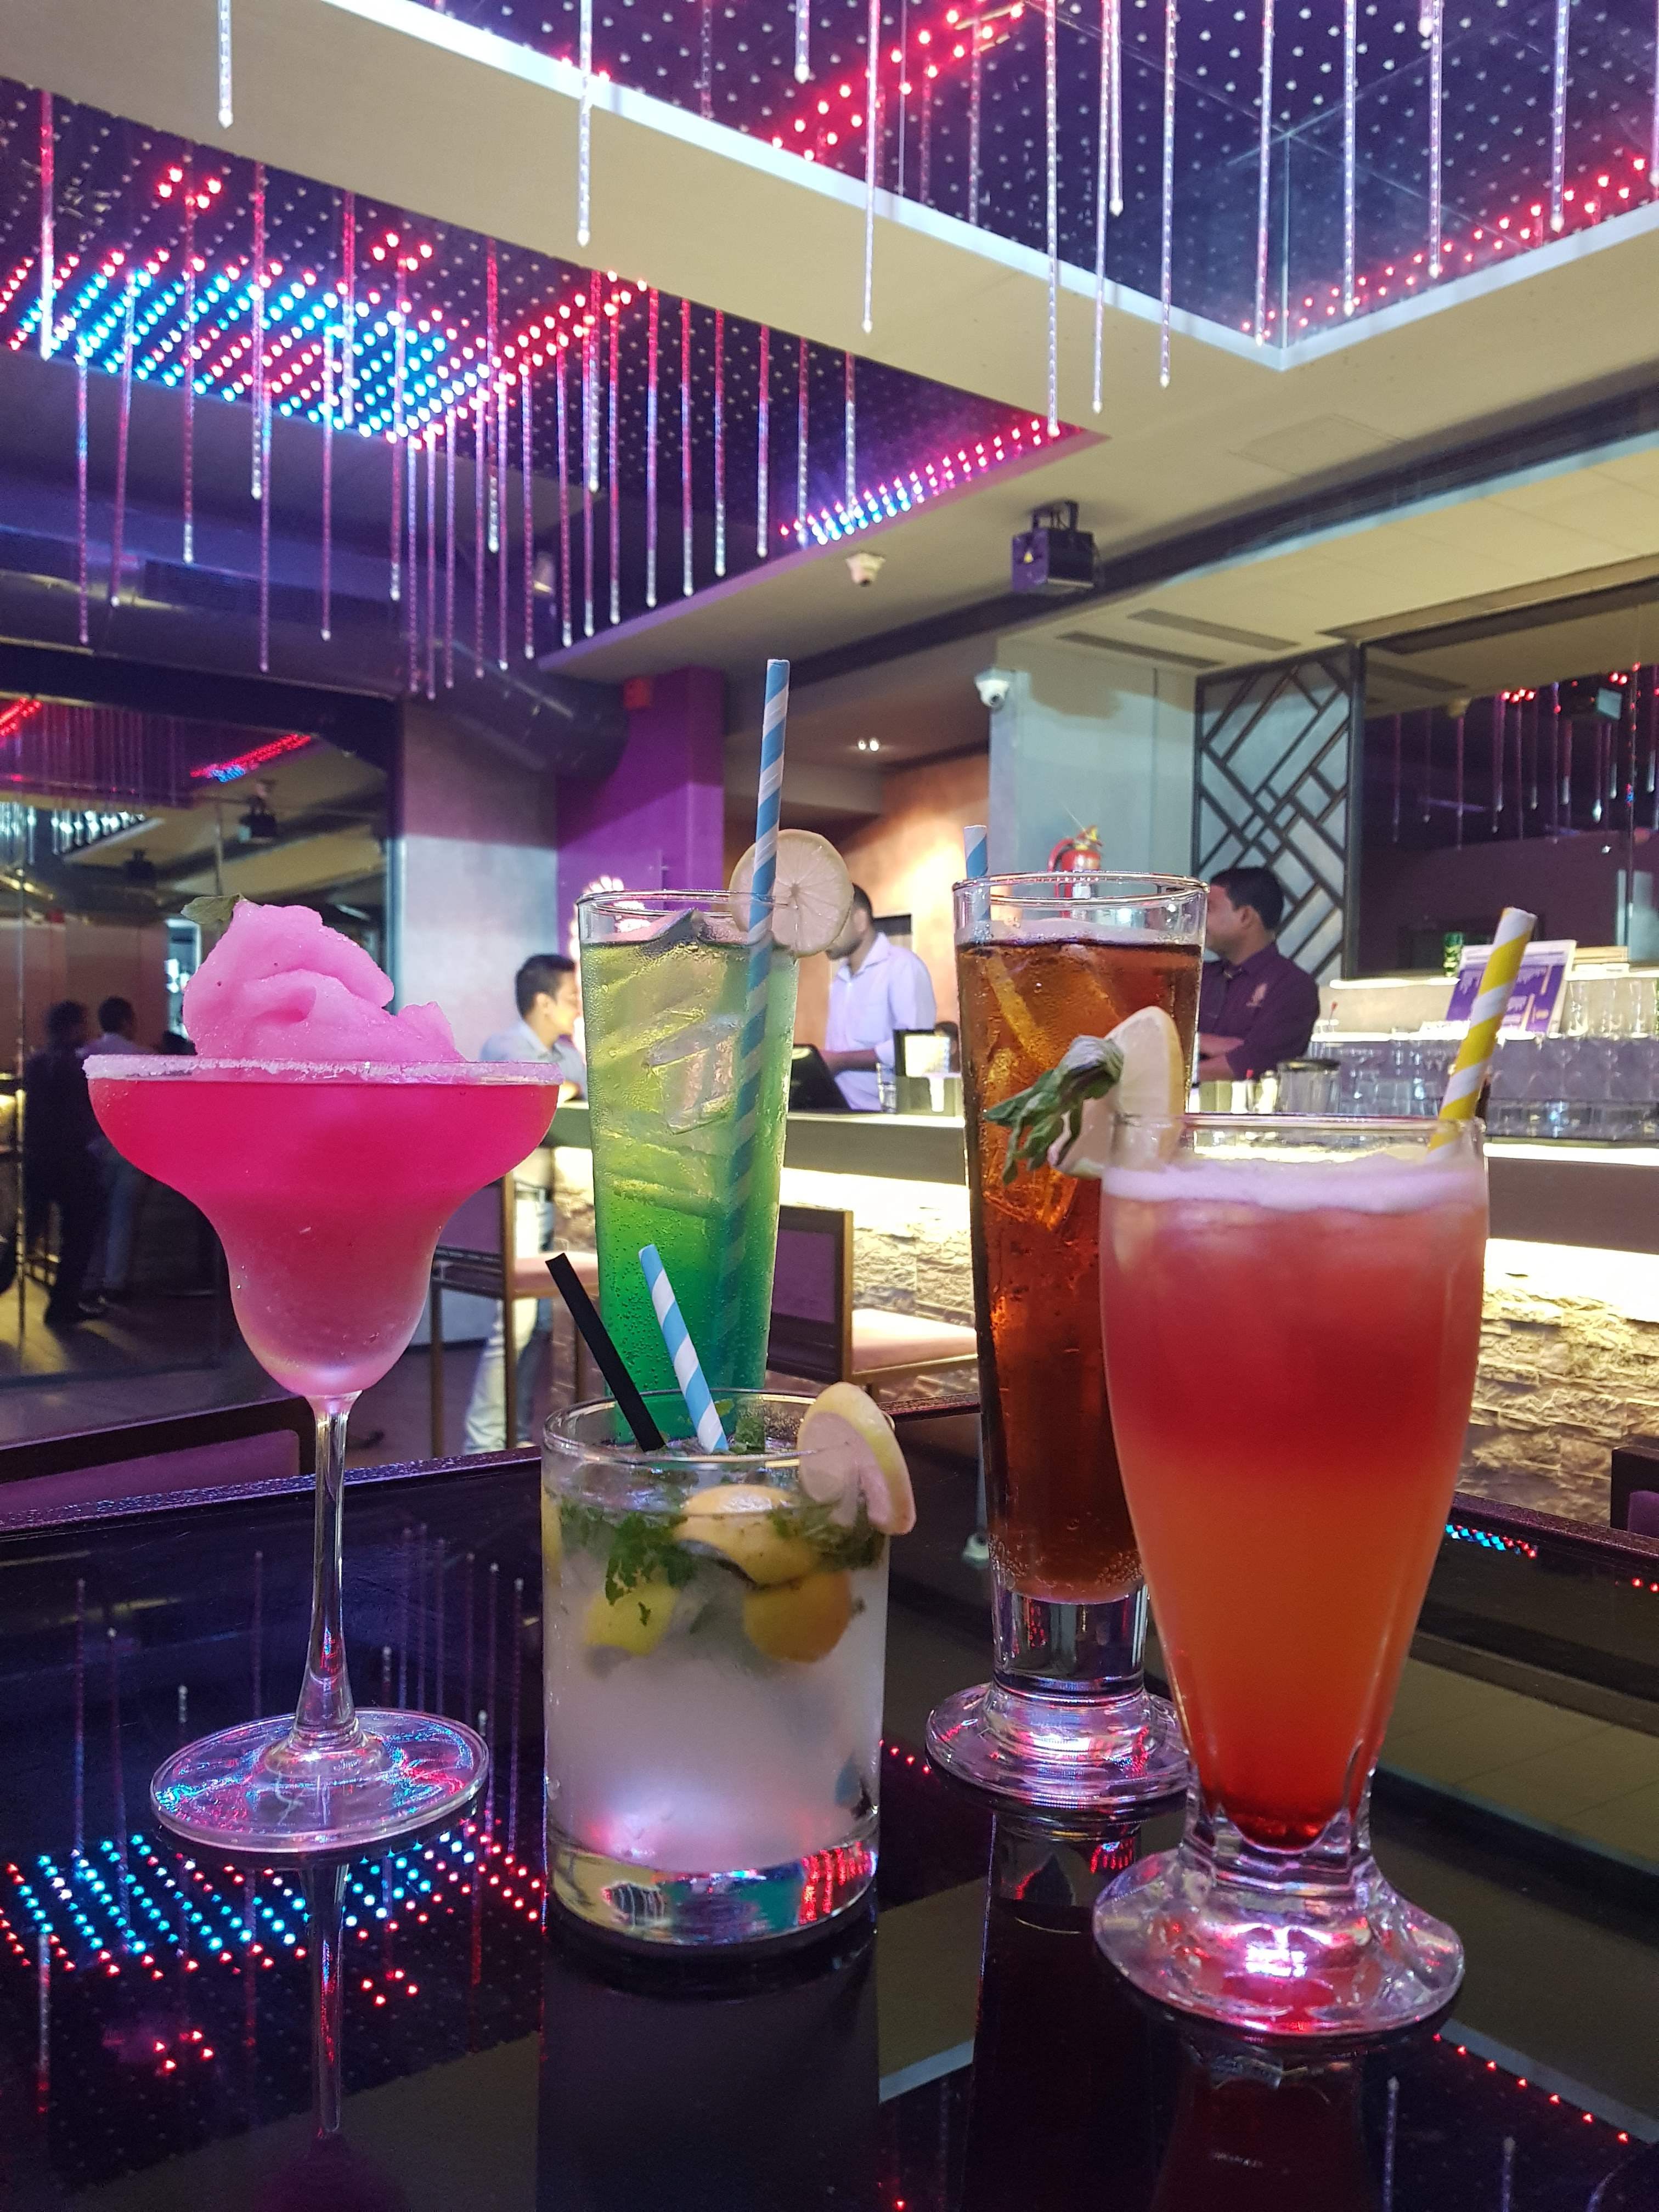 Drink,Alcoholic beverage,Cocktail,Distilled beverage,Classic cocktail,Non-alcoholic beverage,Pink lady,Punch,Cosmopolitan,Daiquiri